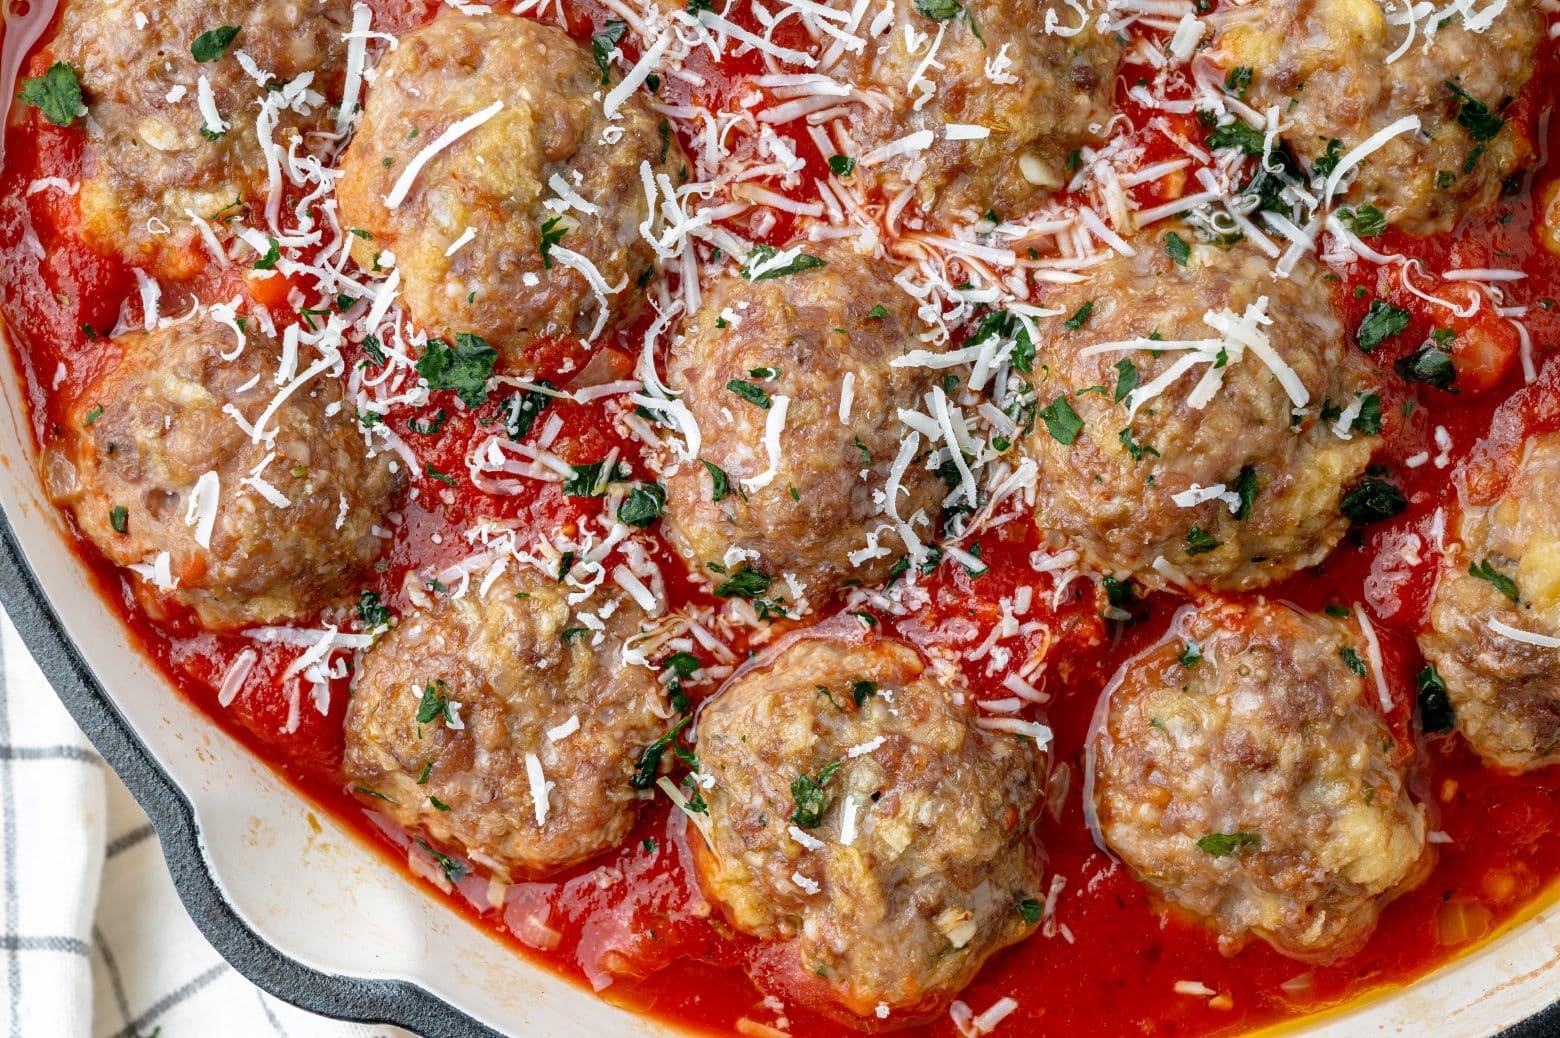 The Baking Tool I Use for Making Perfect Meatballs Every Time